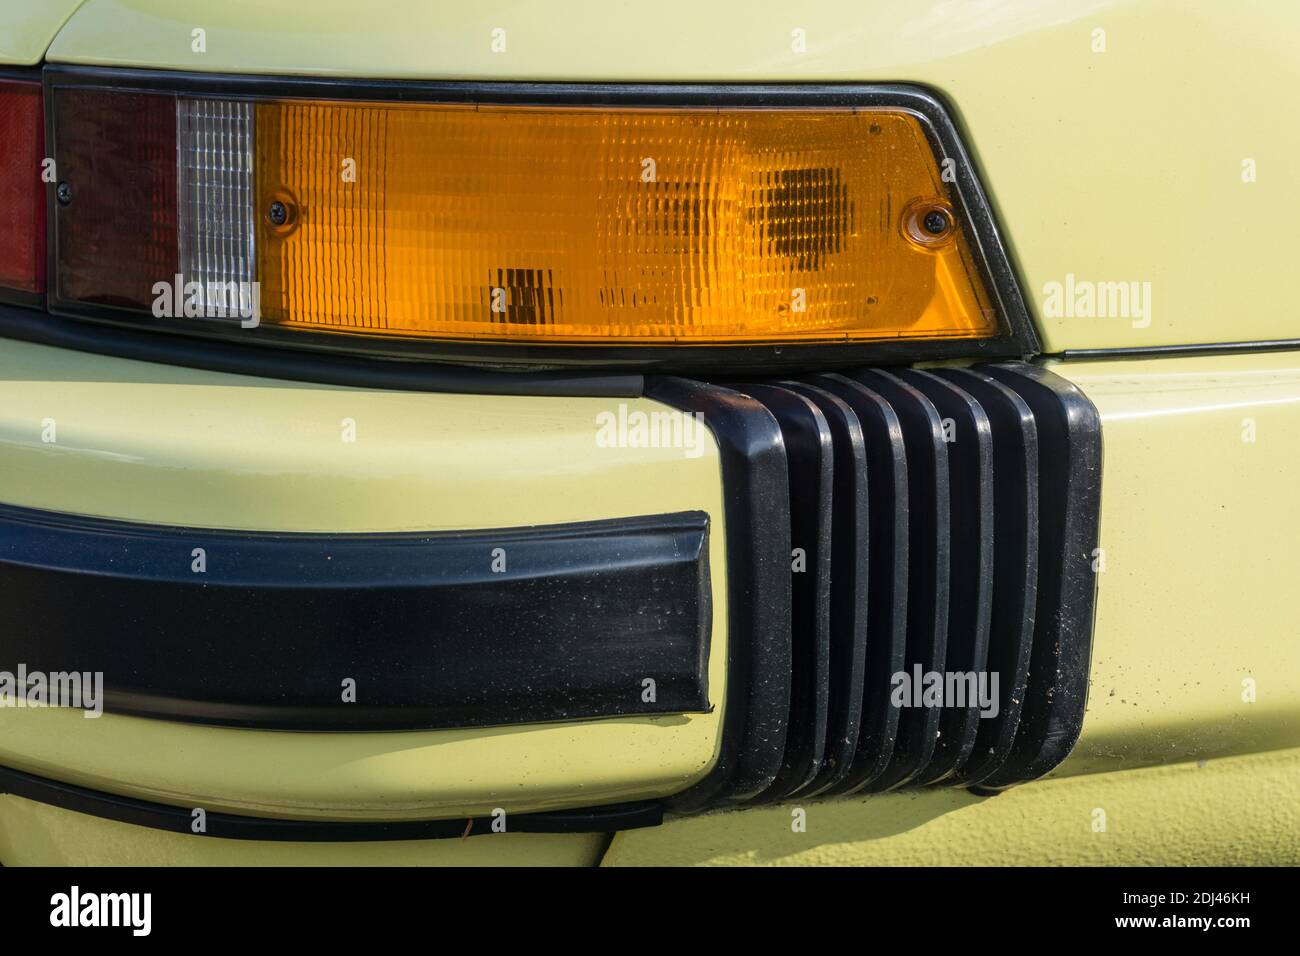 Close up detail of the rear bumper and indicator on a yellow eighties Porsche 911 3.2 Carrera sports car outside in sunshine. Stock Photo